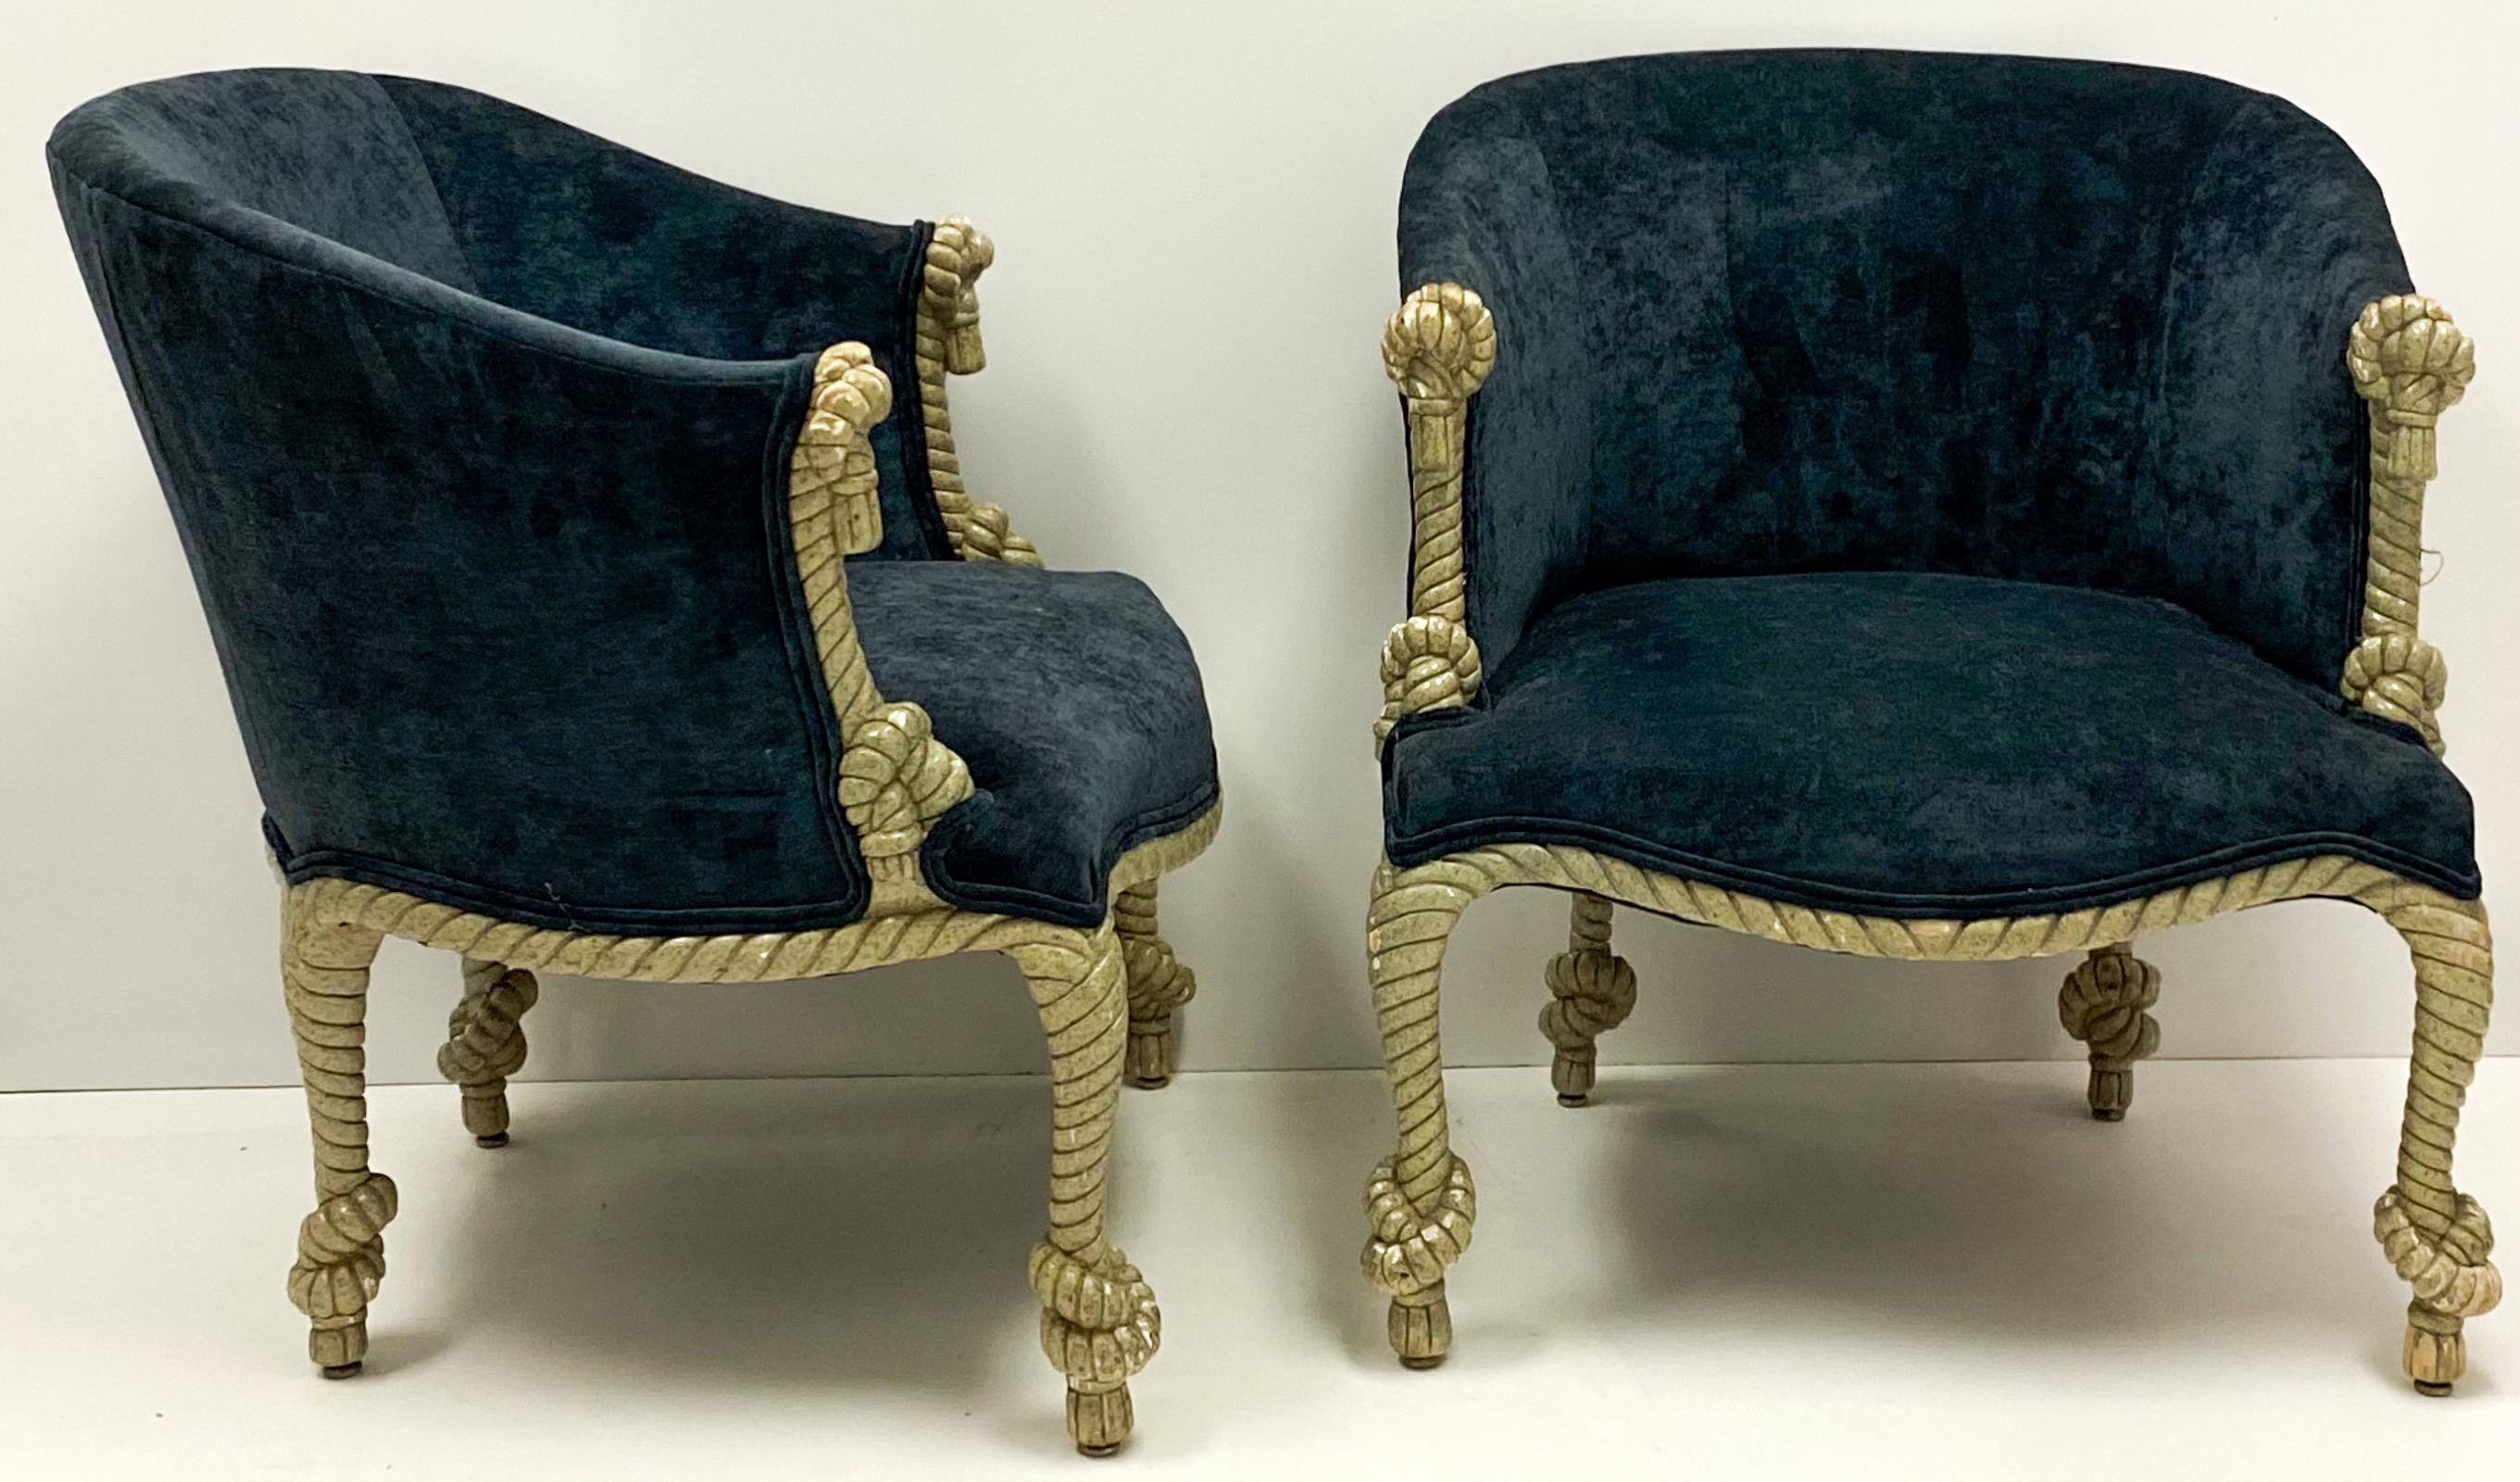 This is a pair of Hollywood Regency gilt and tassel pair of velvet tub chairs. The frames are gilt gesso over wood. The velvet is a recent addition. They are unmarked and in very good condition.